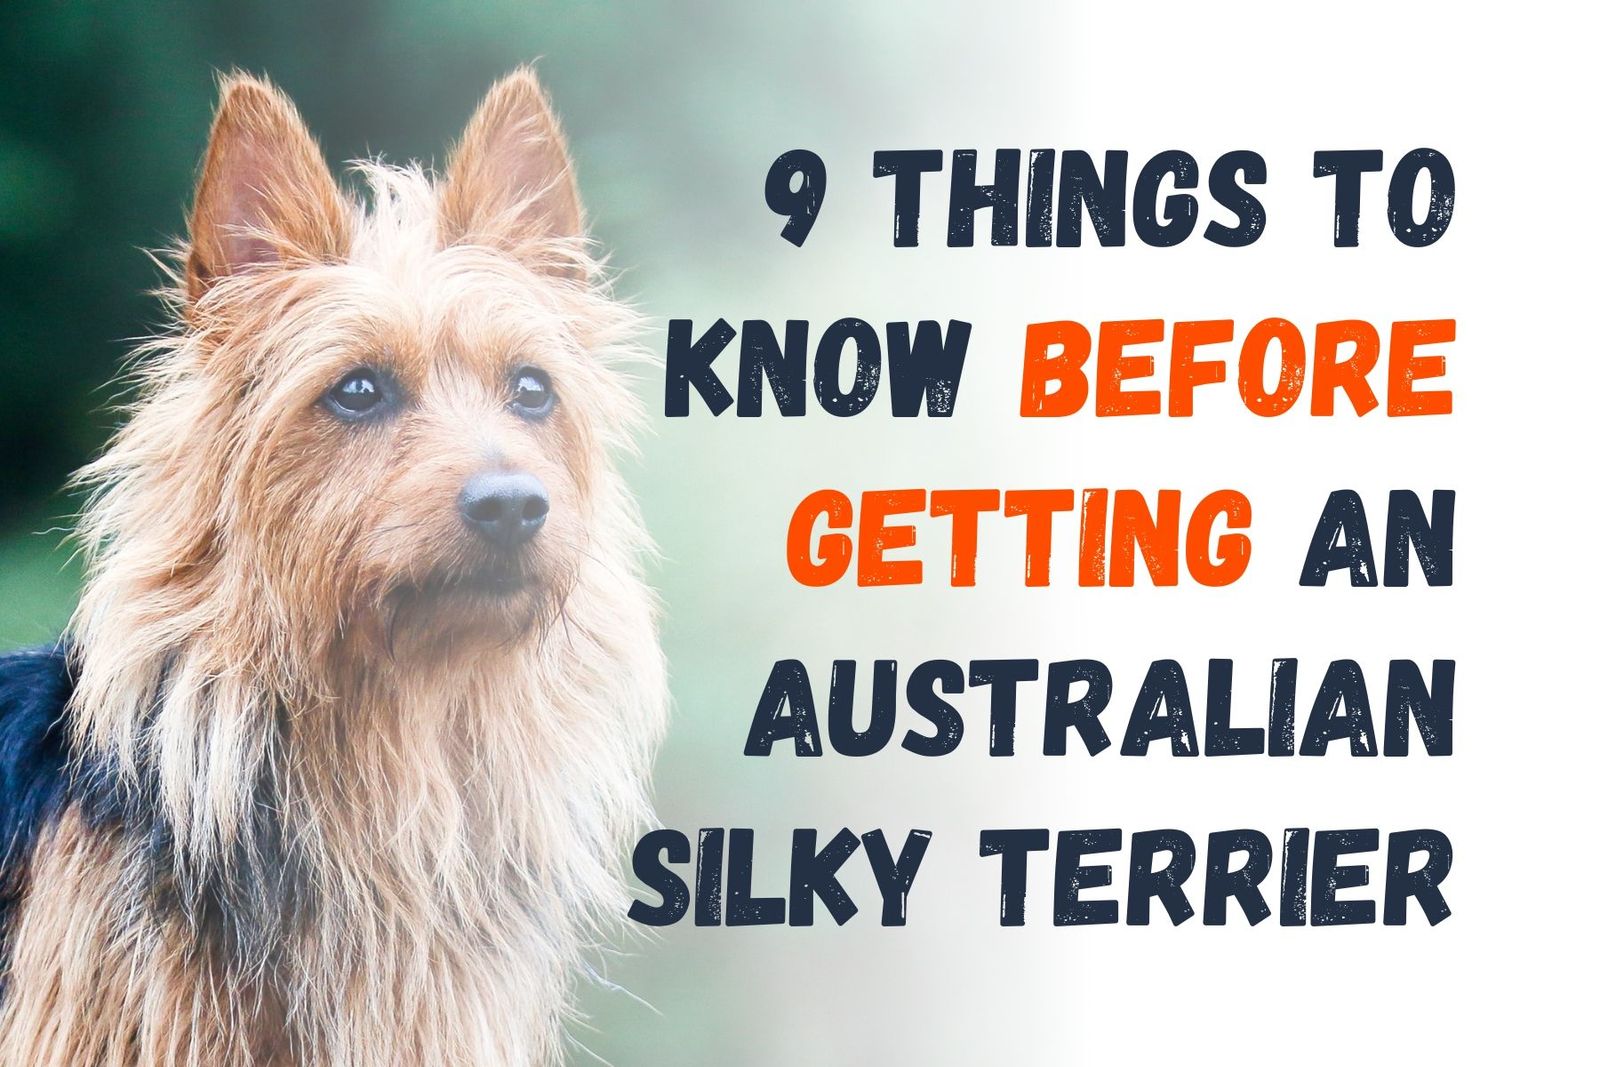 Xlarge 9 Things To Know Before Getting An Australian Silky Terrier Aea30d9db6 